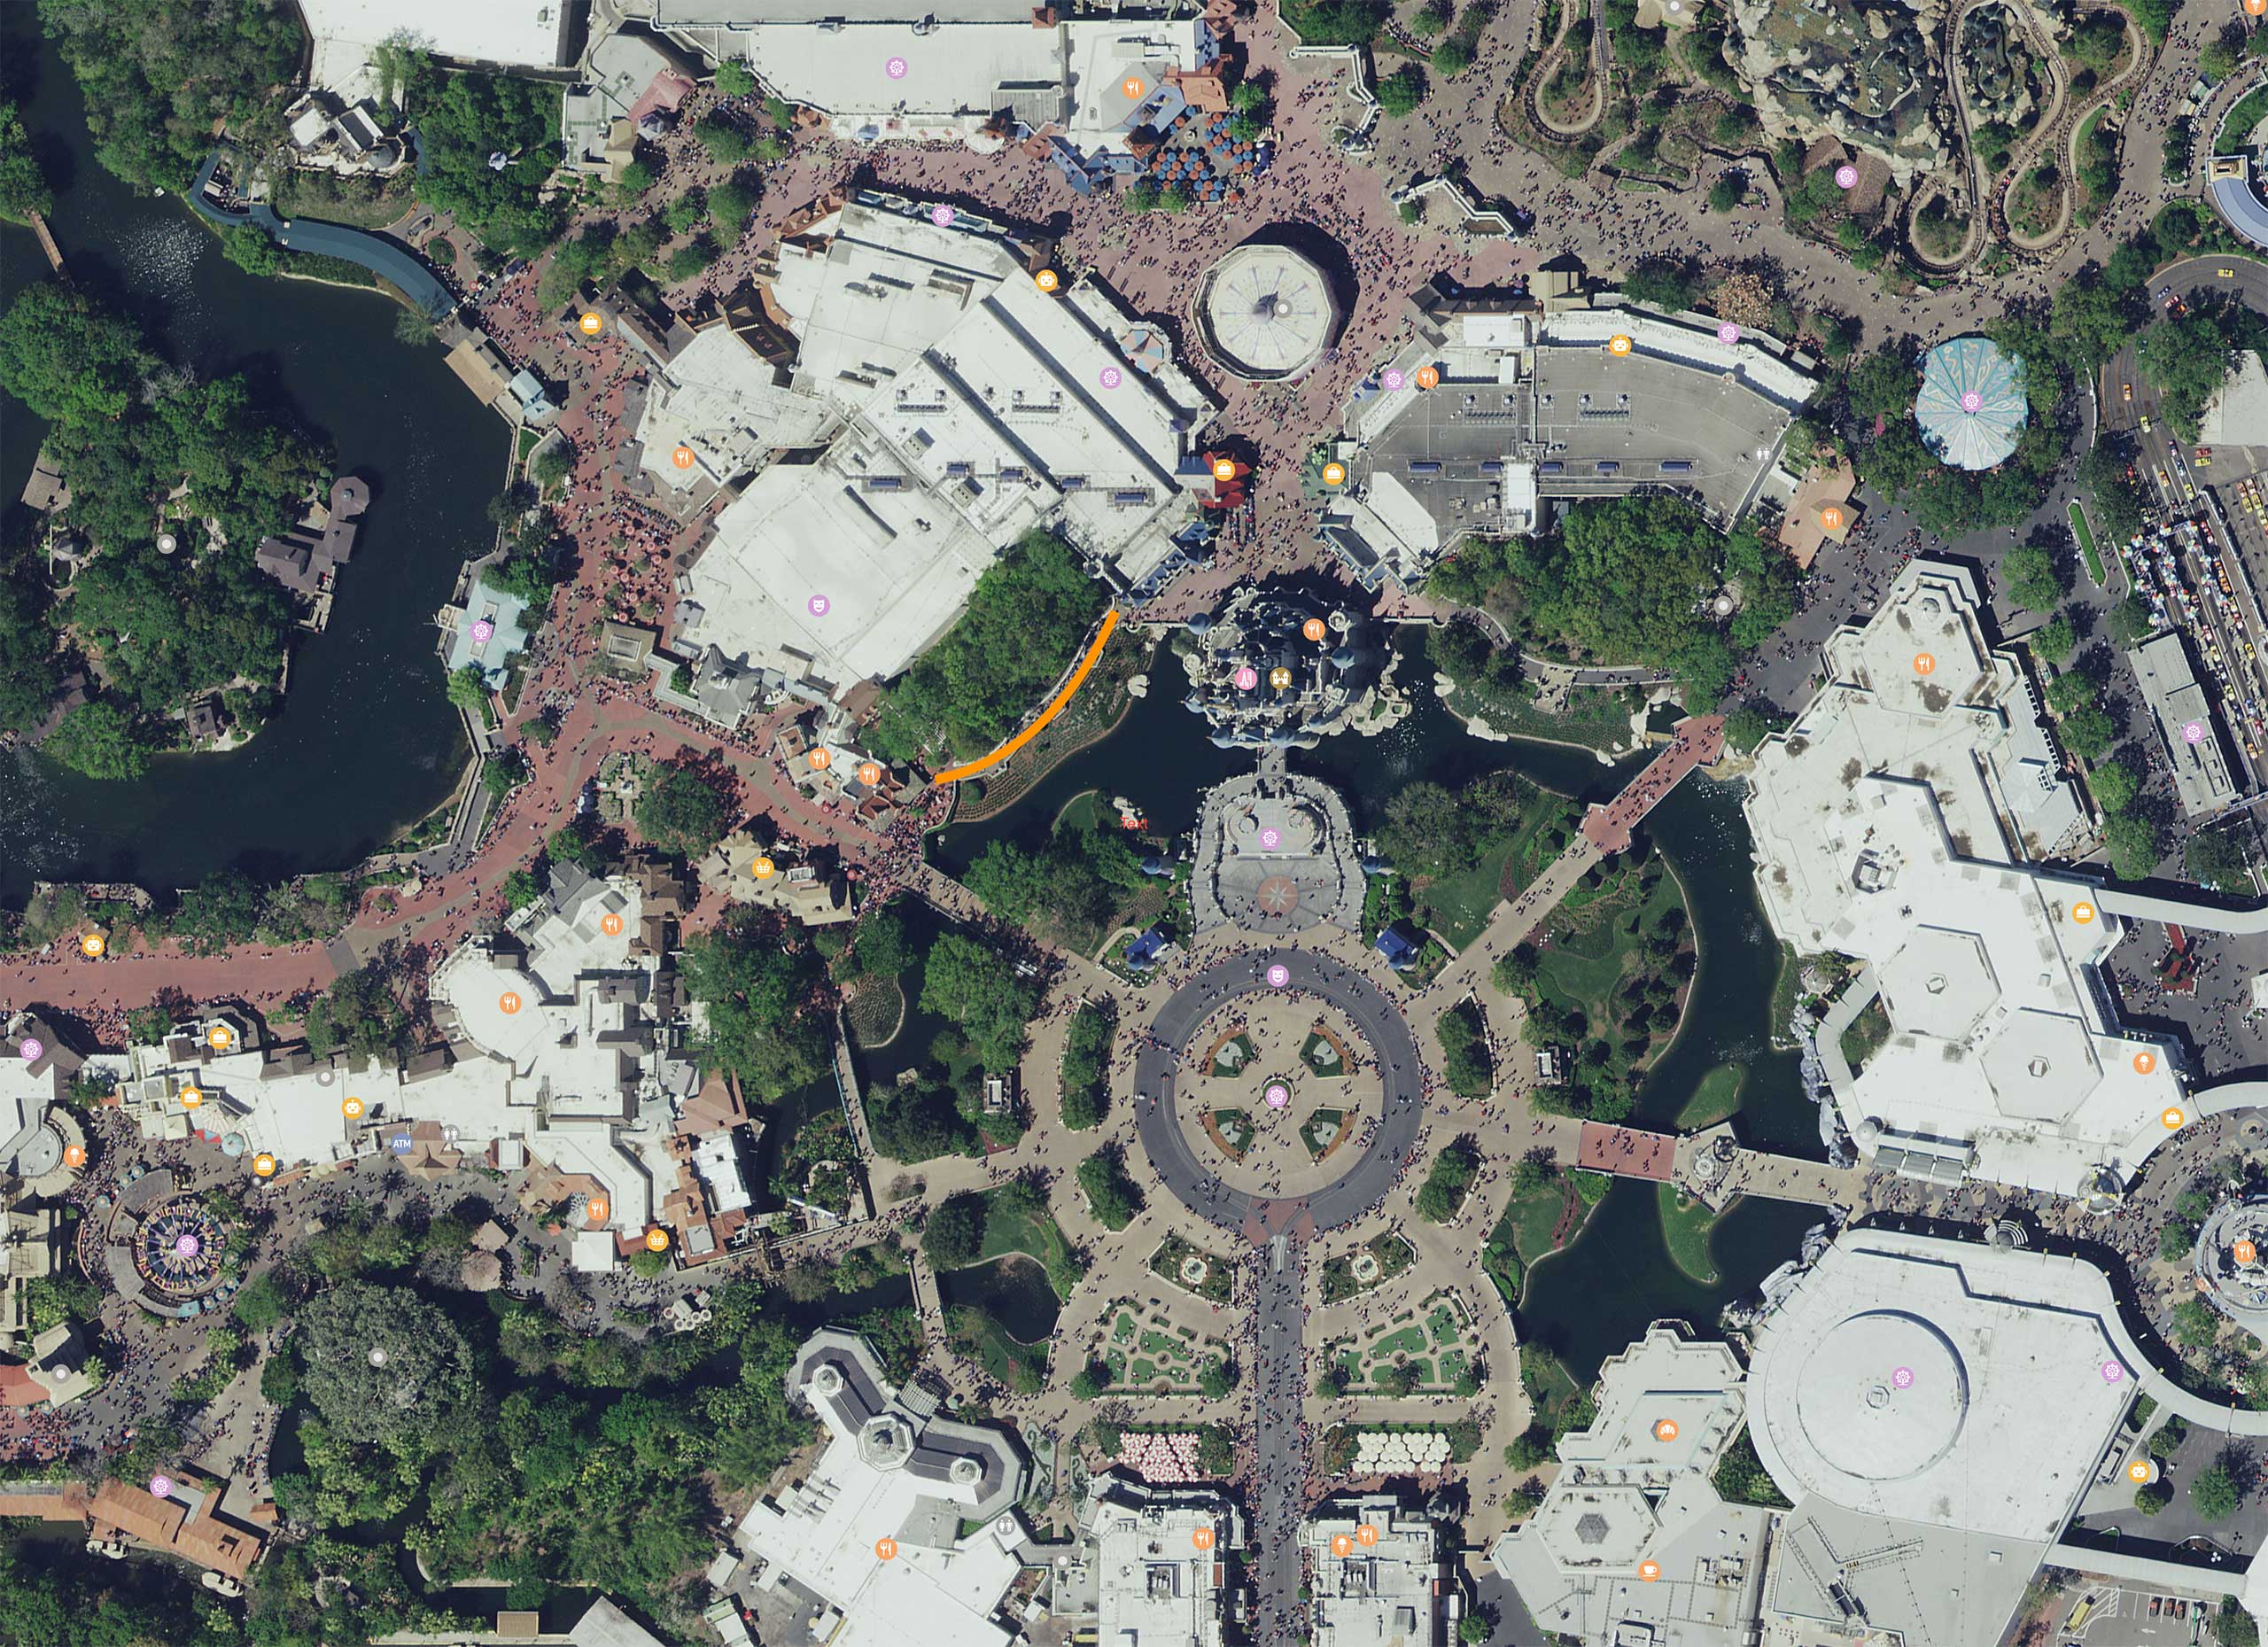 Liberty Square to Cinderella Castle walkway widening overview